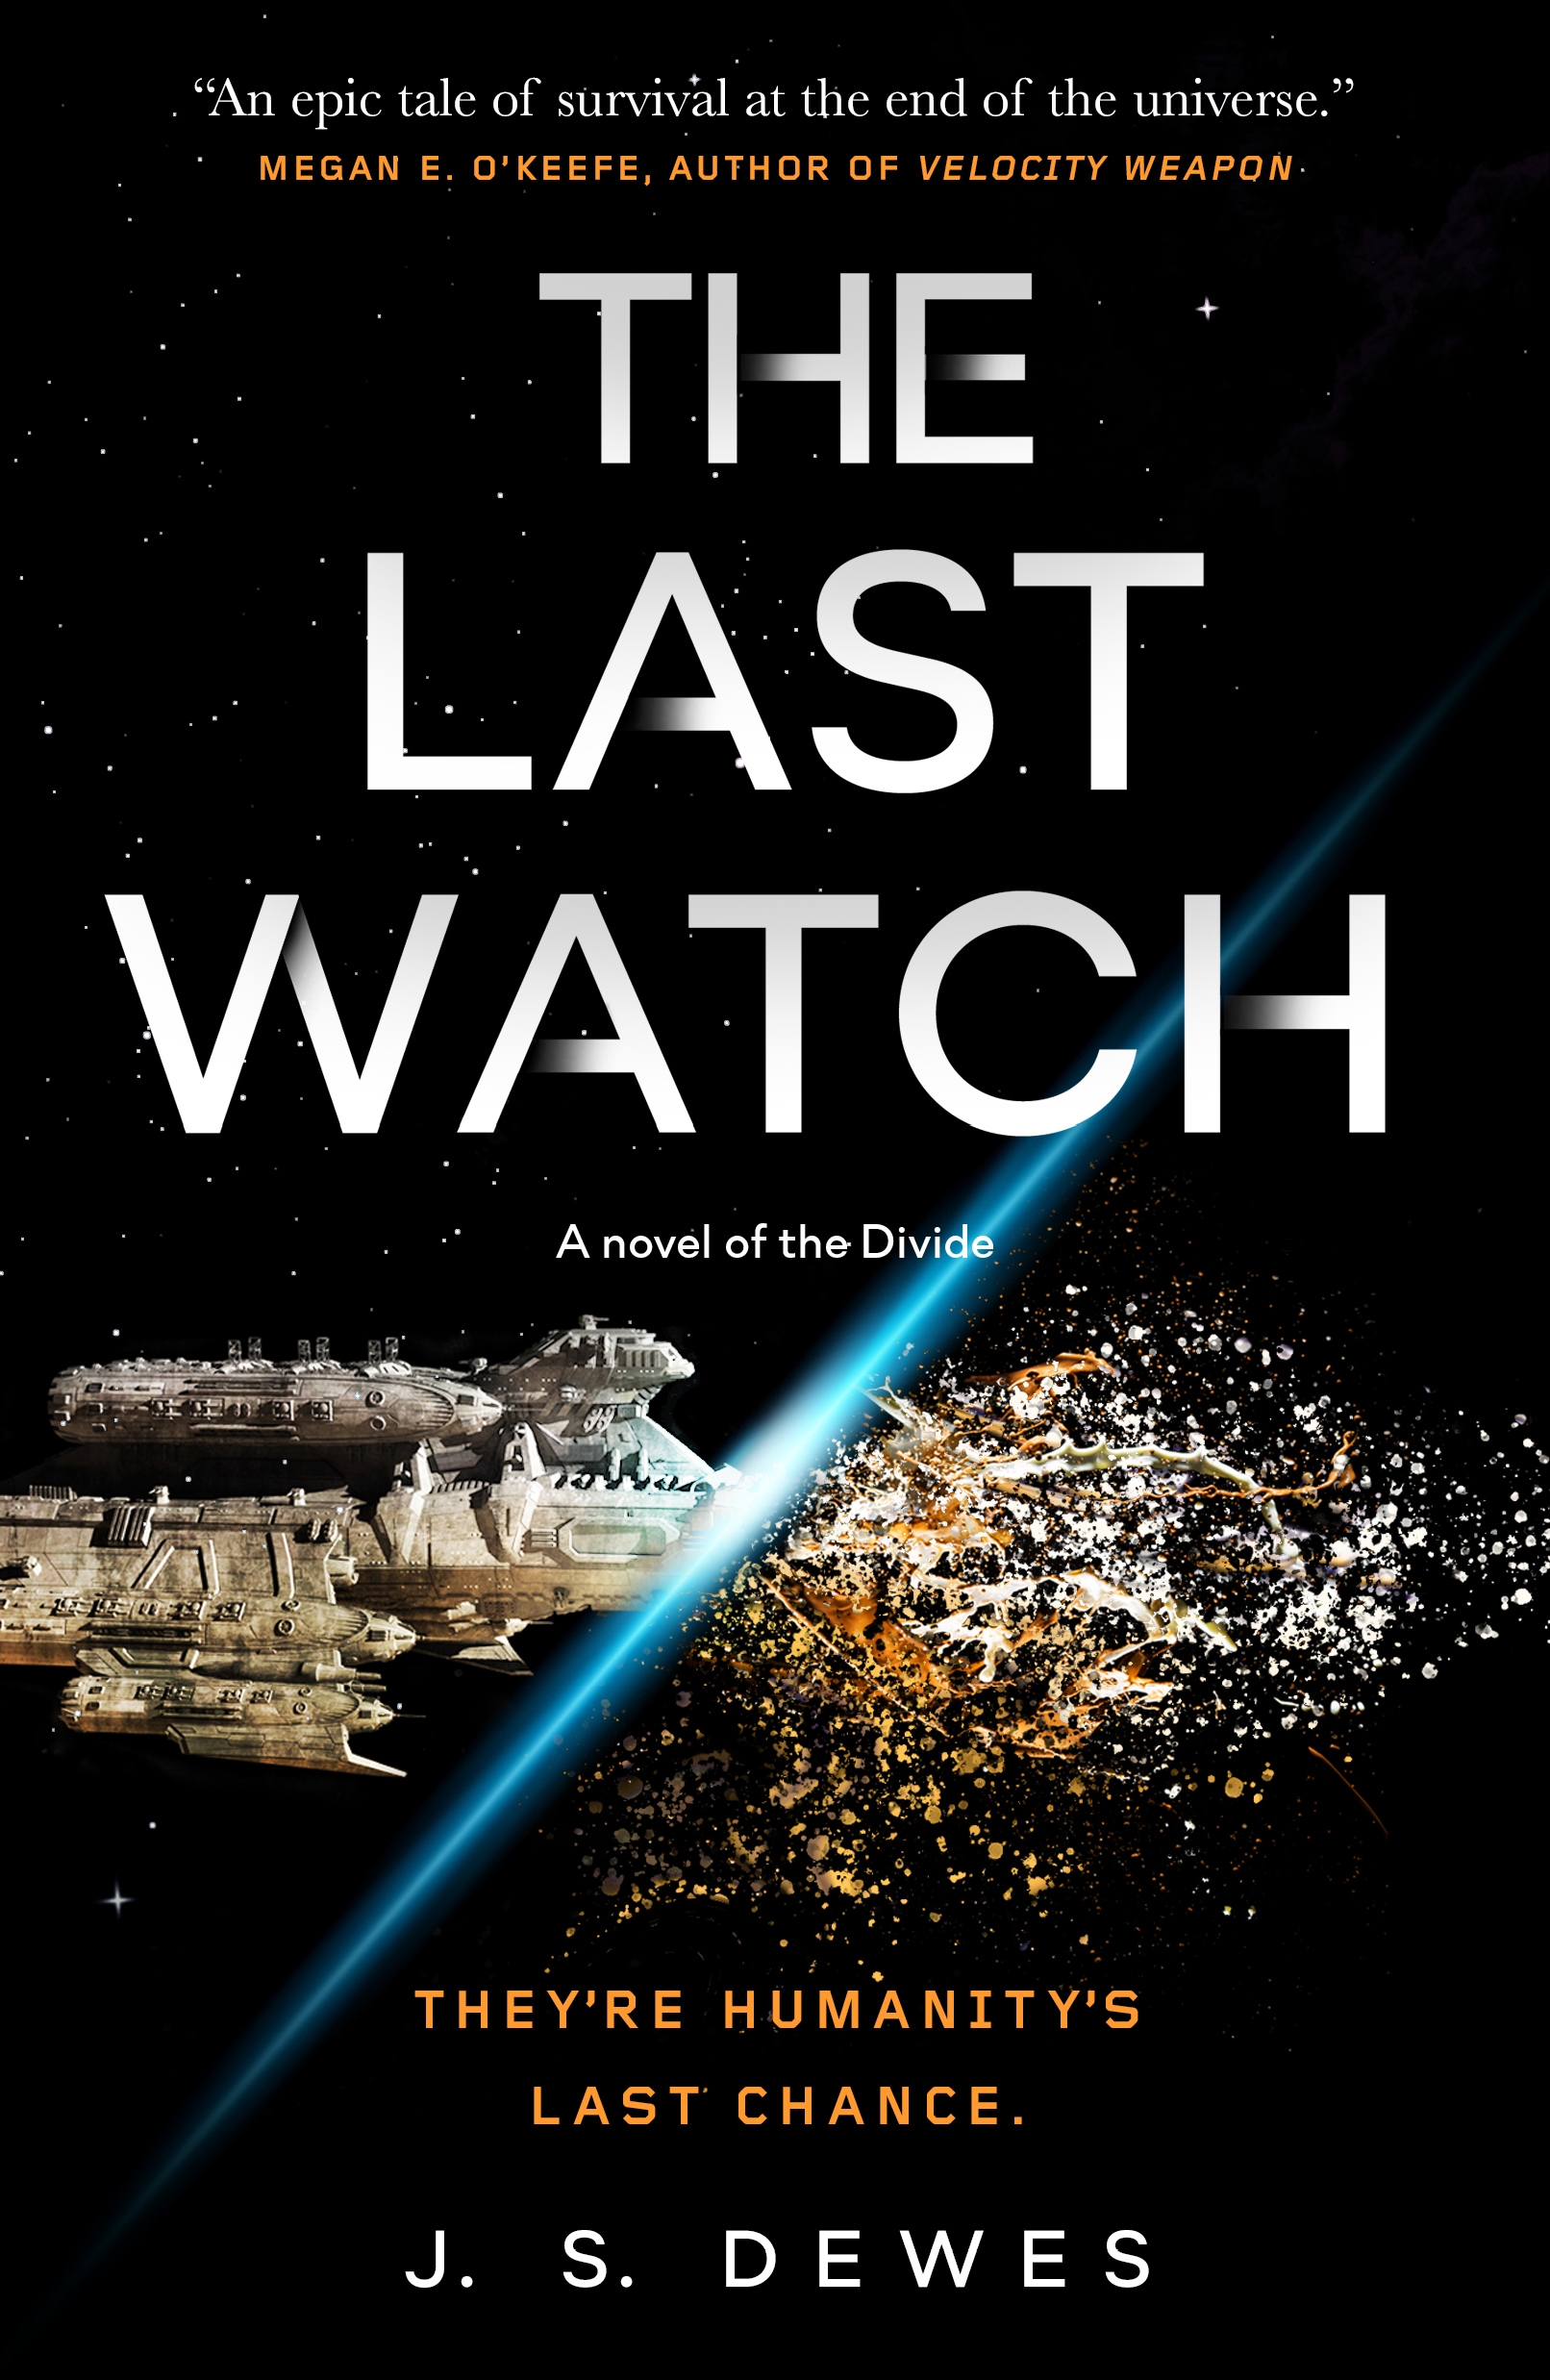 The Last Watch by J. S. Dewes